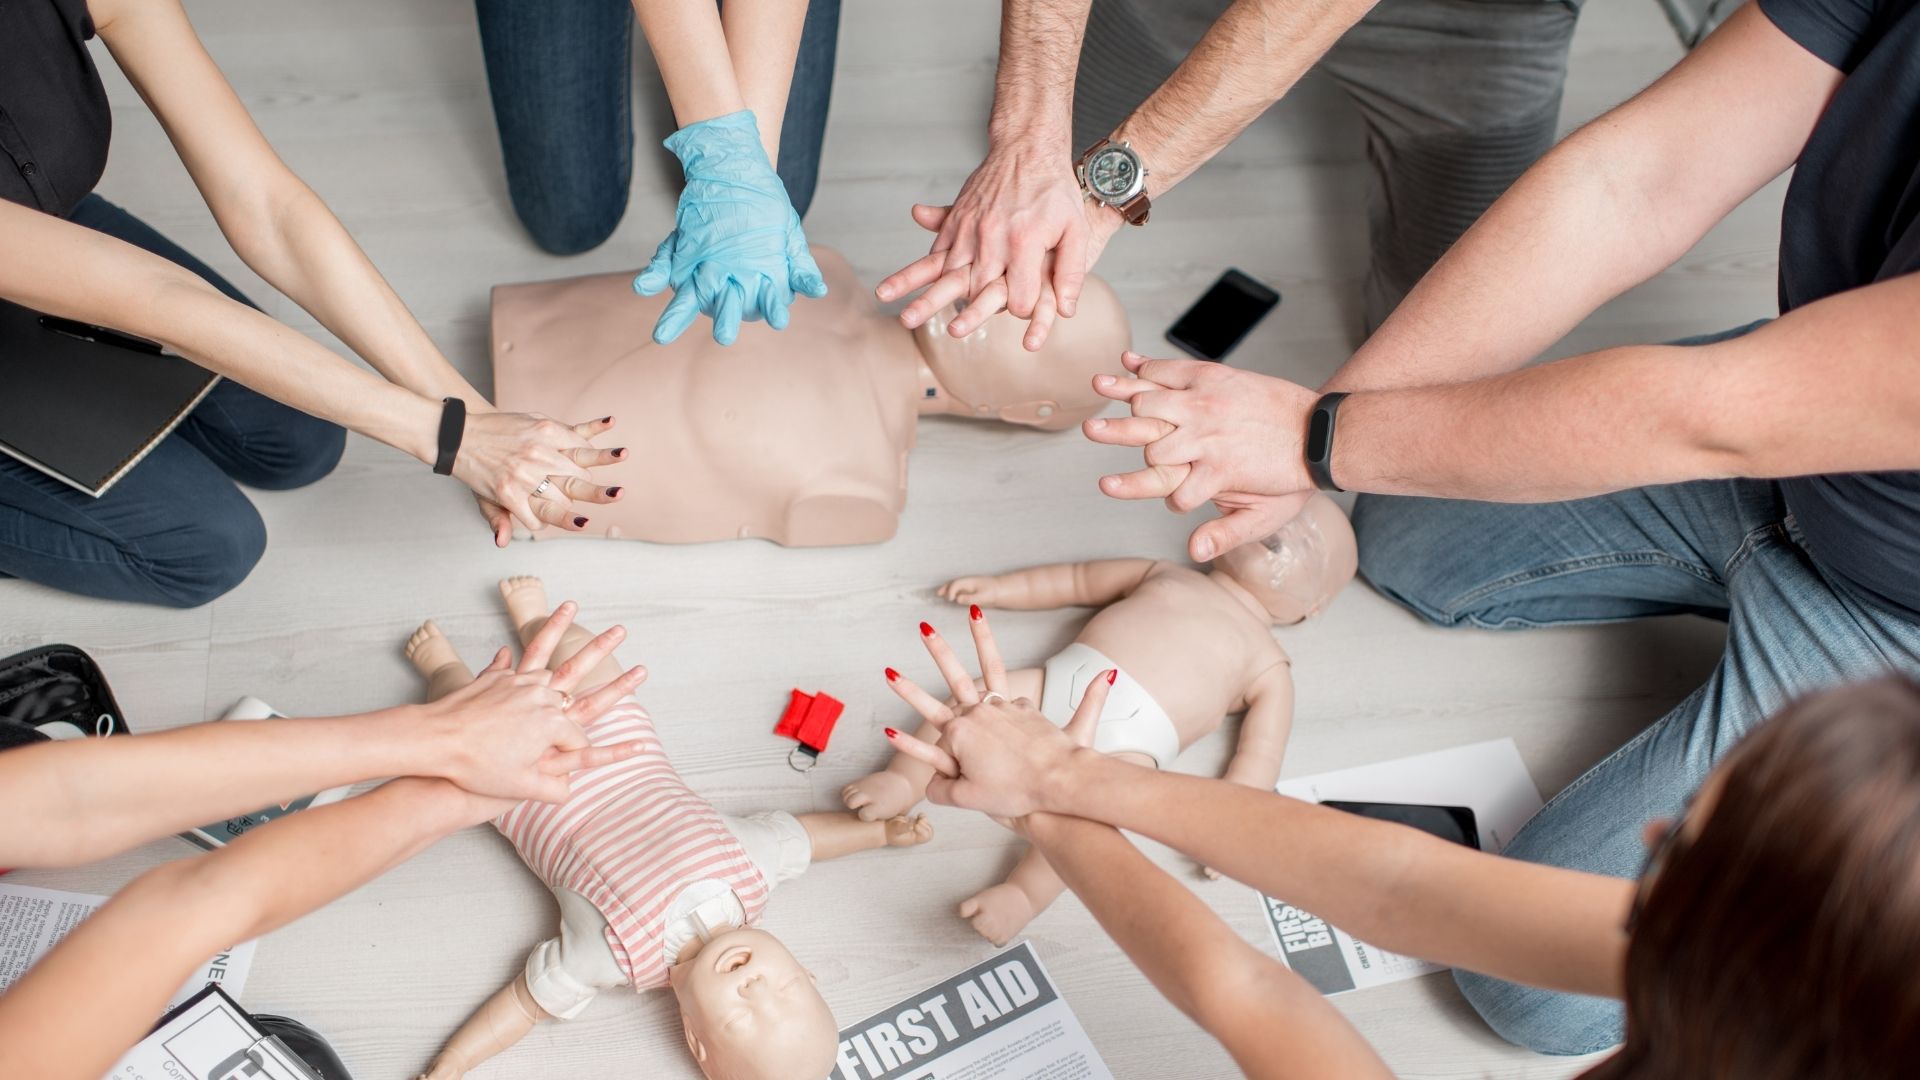 The most common myths about CPR